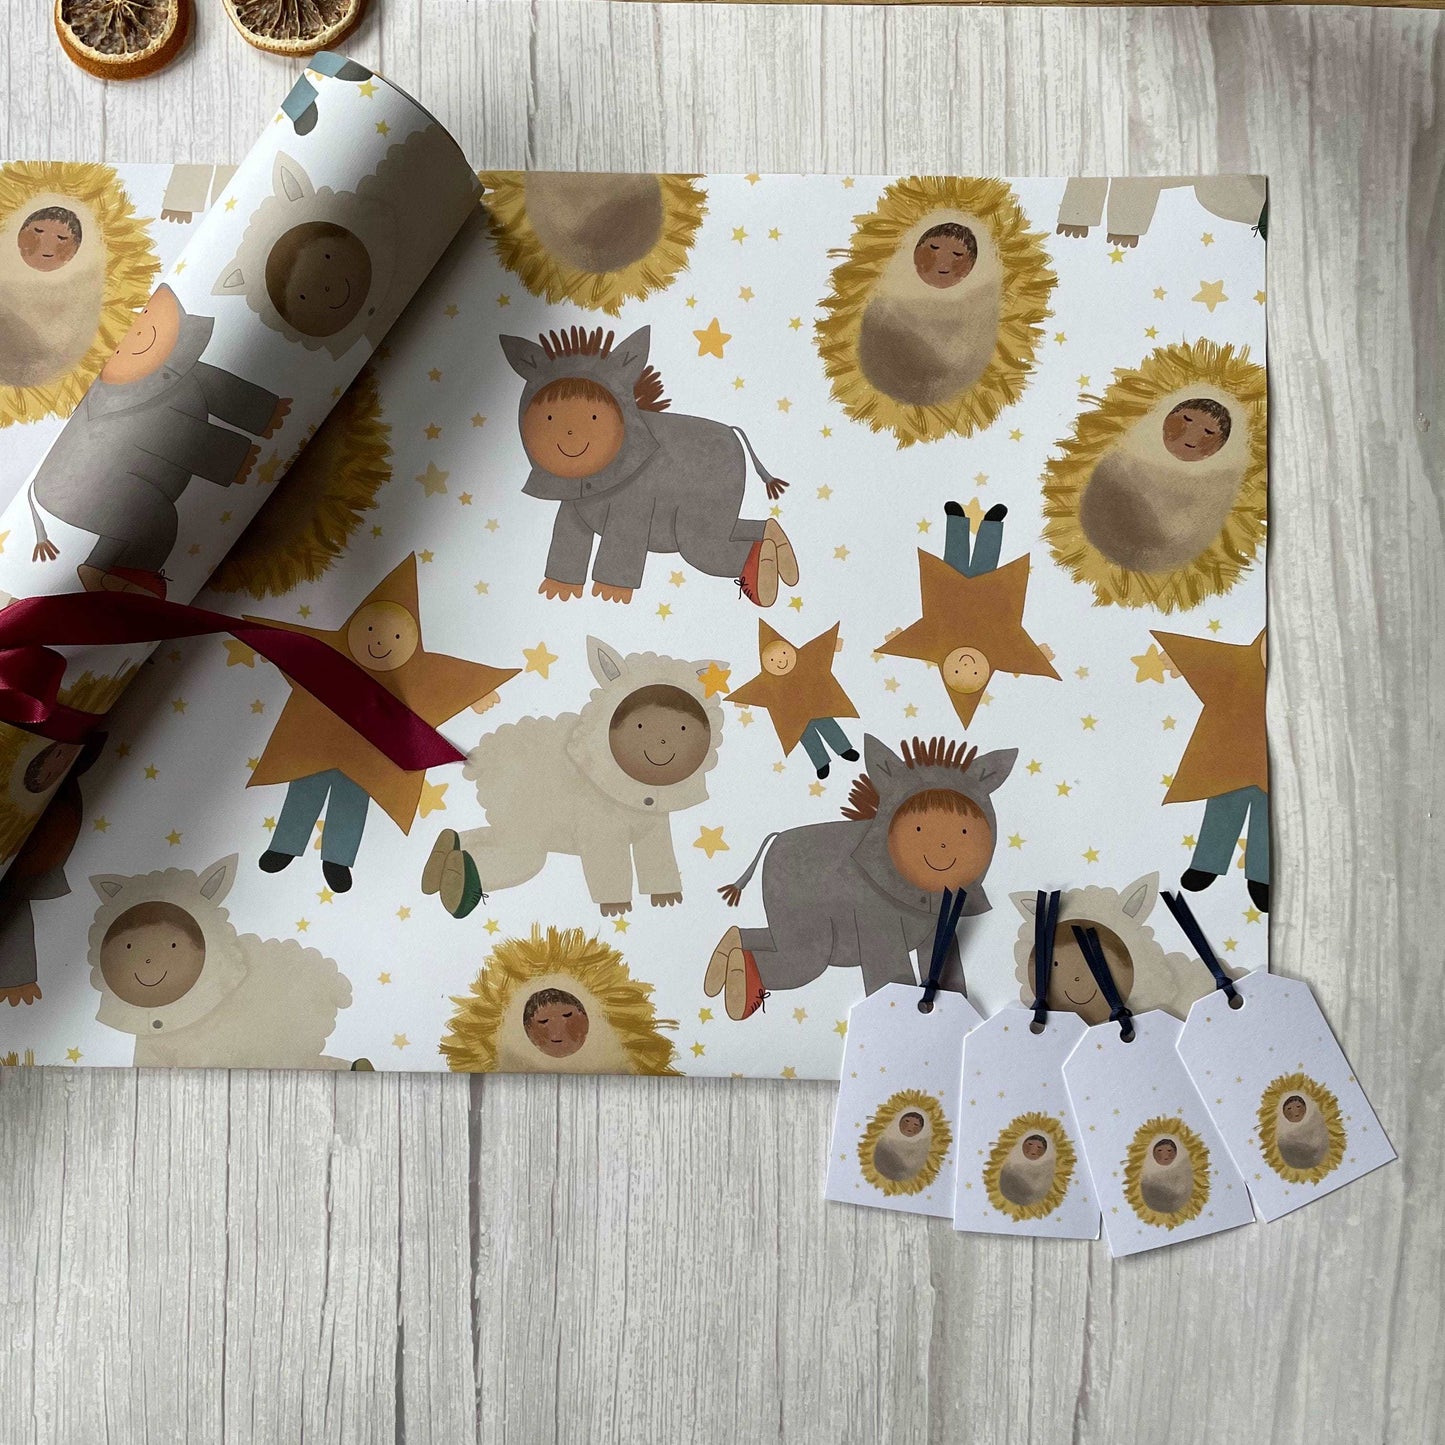 Christian Christmas nativity wrapping paper And Hope Designs Wrapping Paper